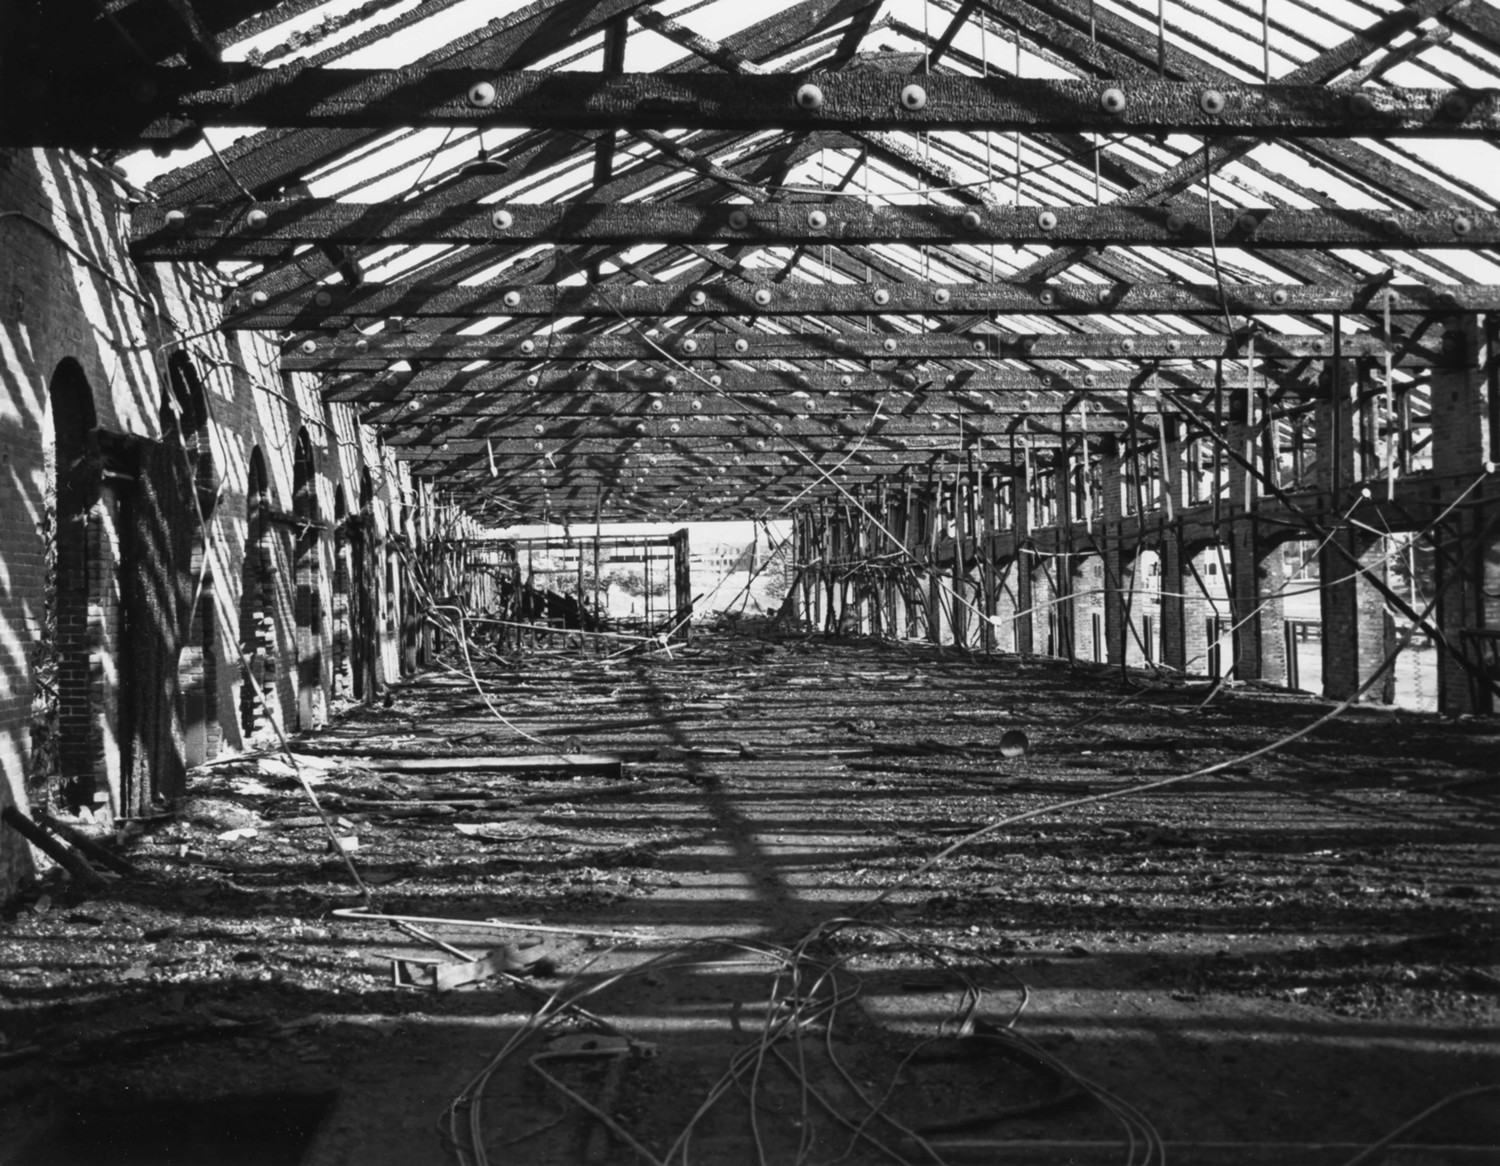 North Freight Station, Providence Rhode Island After the fire (1980)